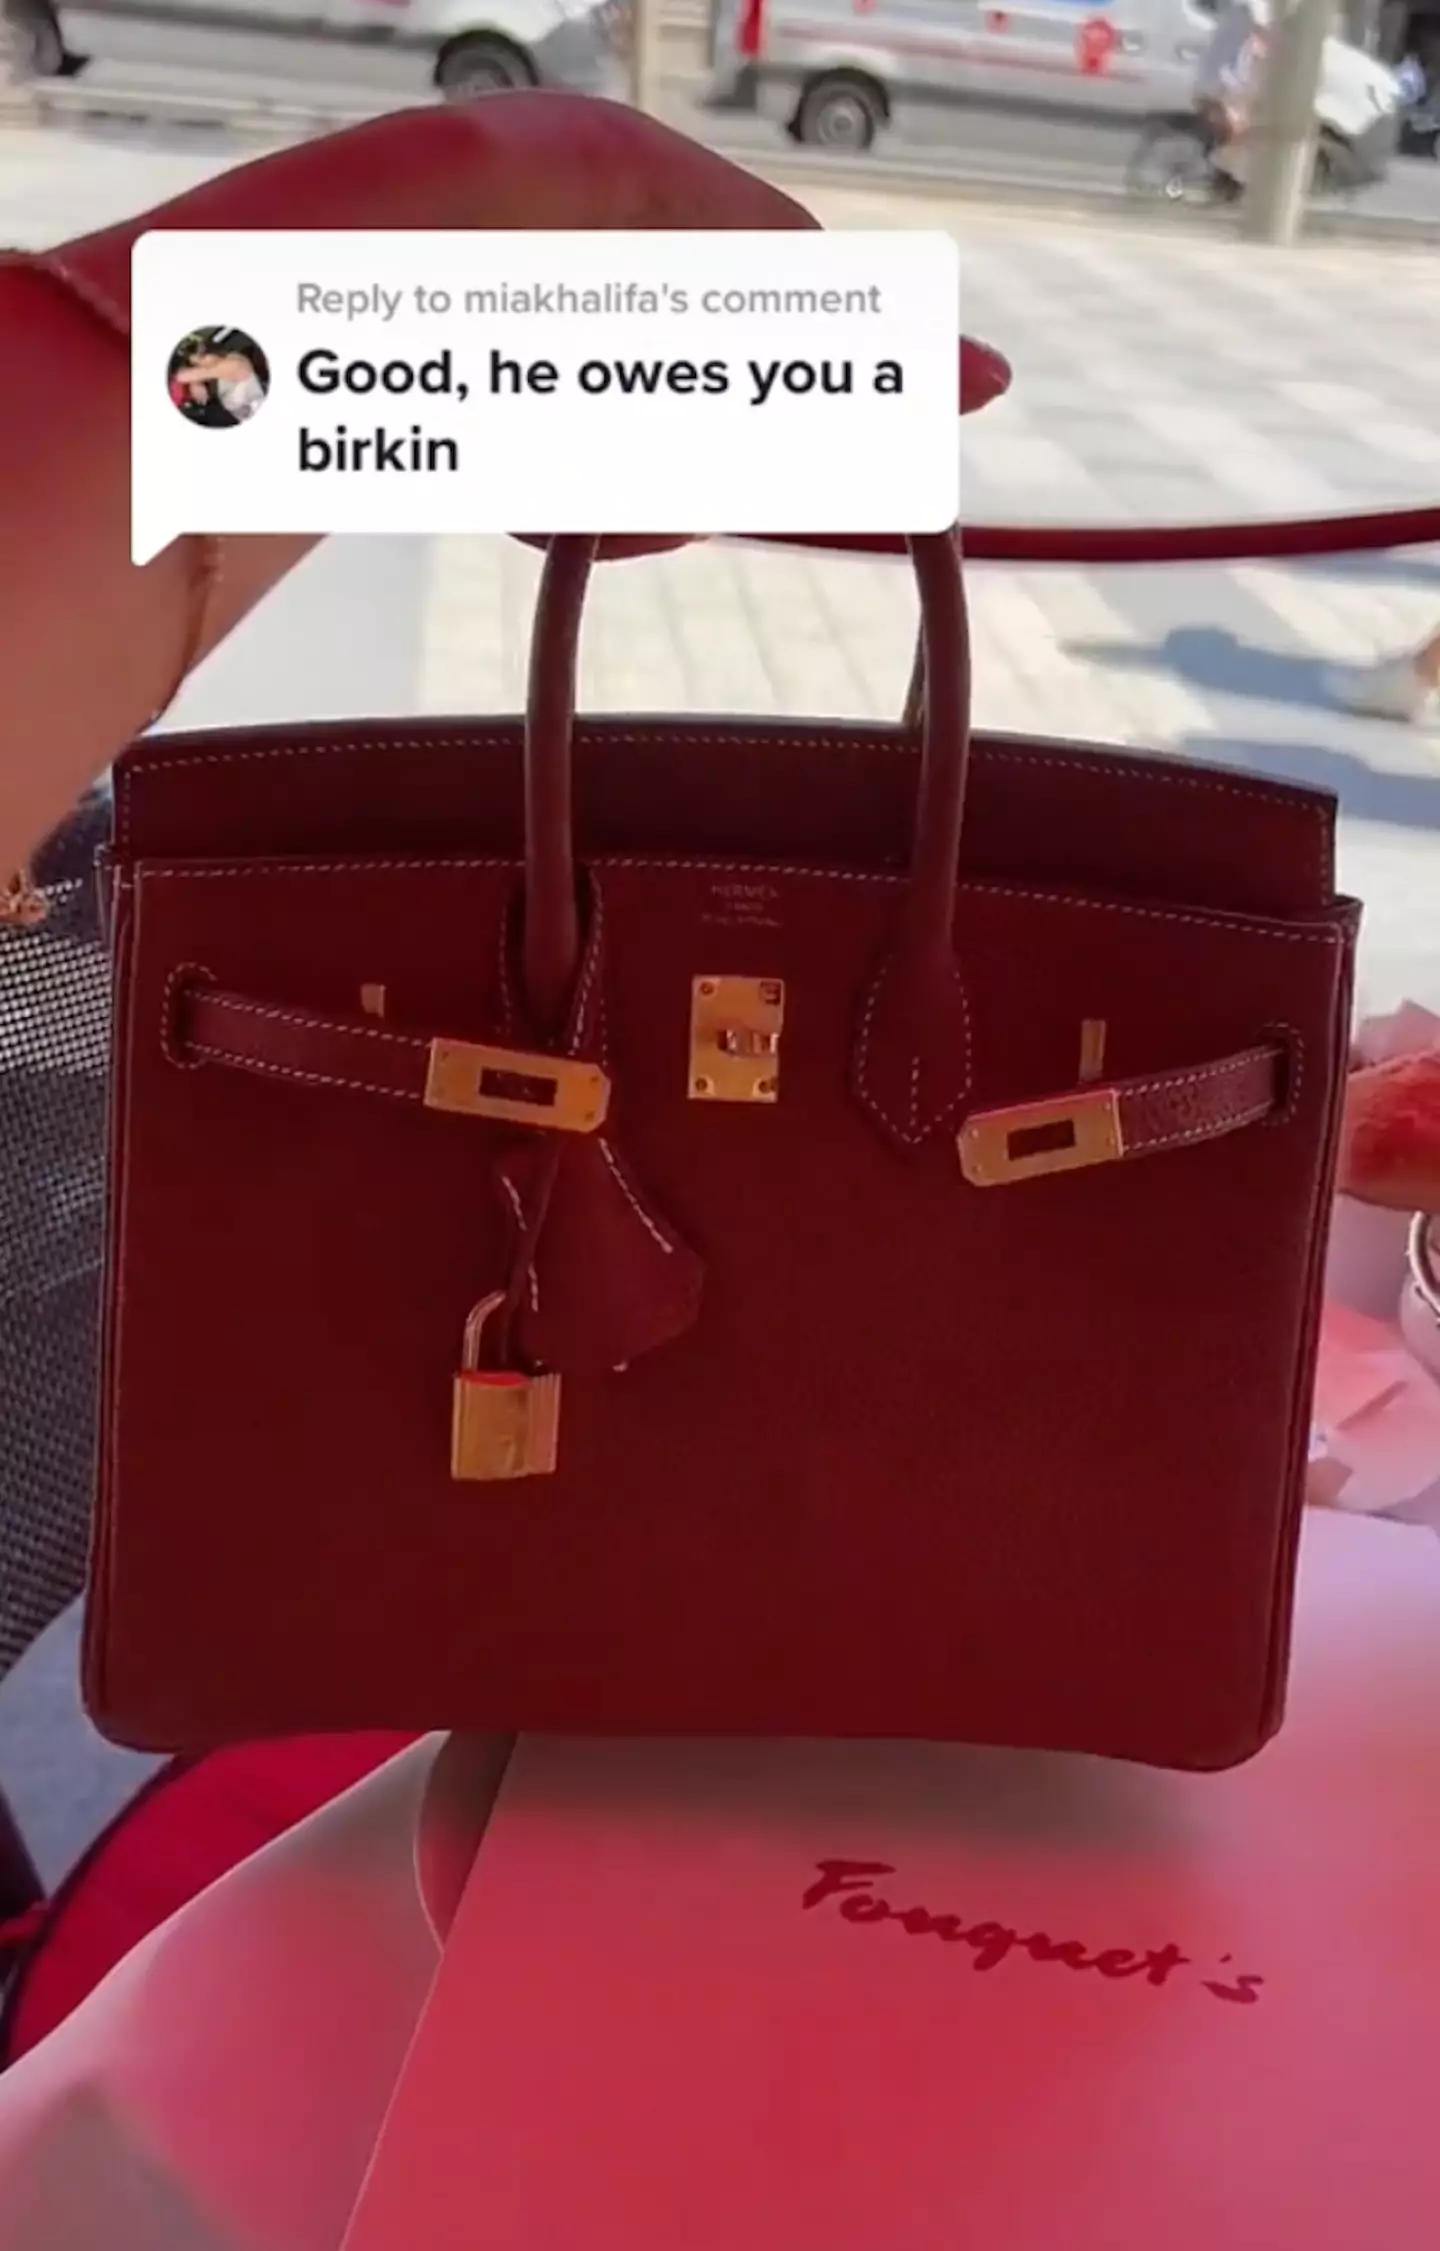 Mia herself reached out and said the husband owes his new wife a Birkin bag.